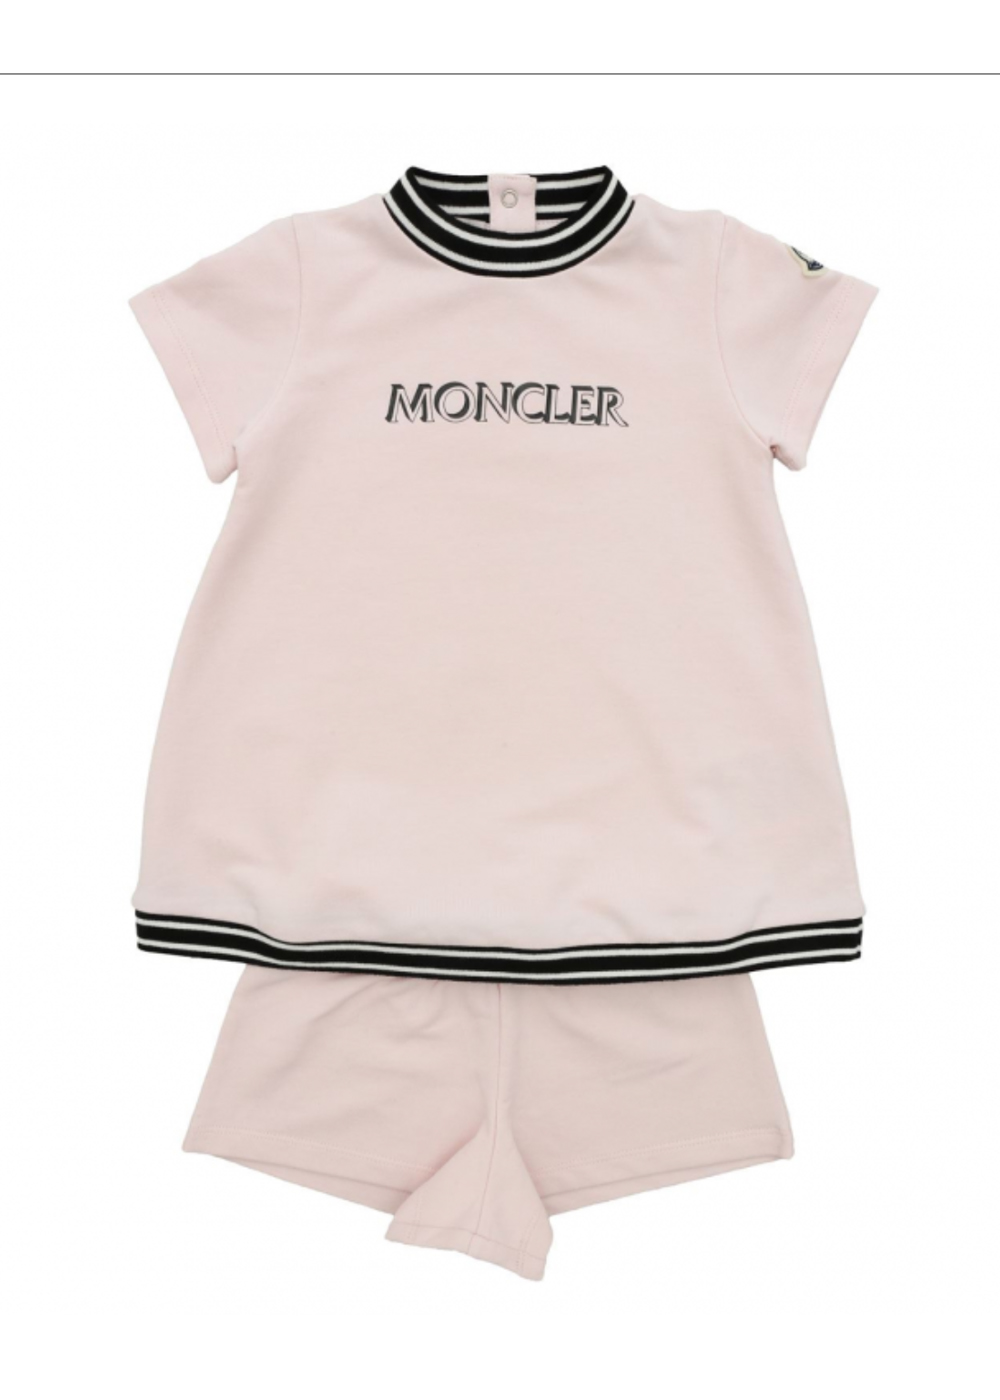 Featured image for “Moncler Completo Neonata”